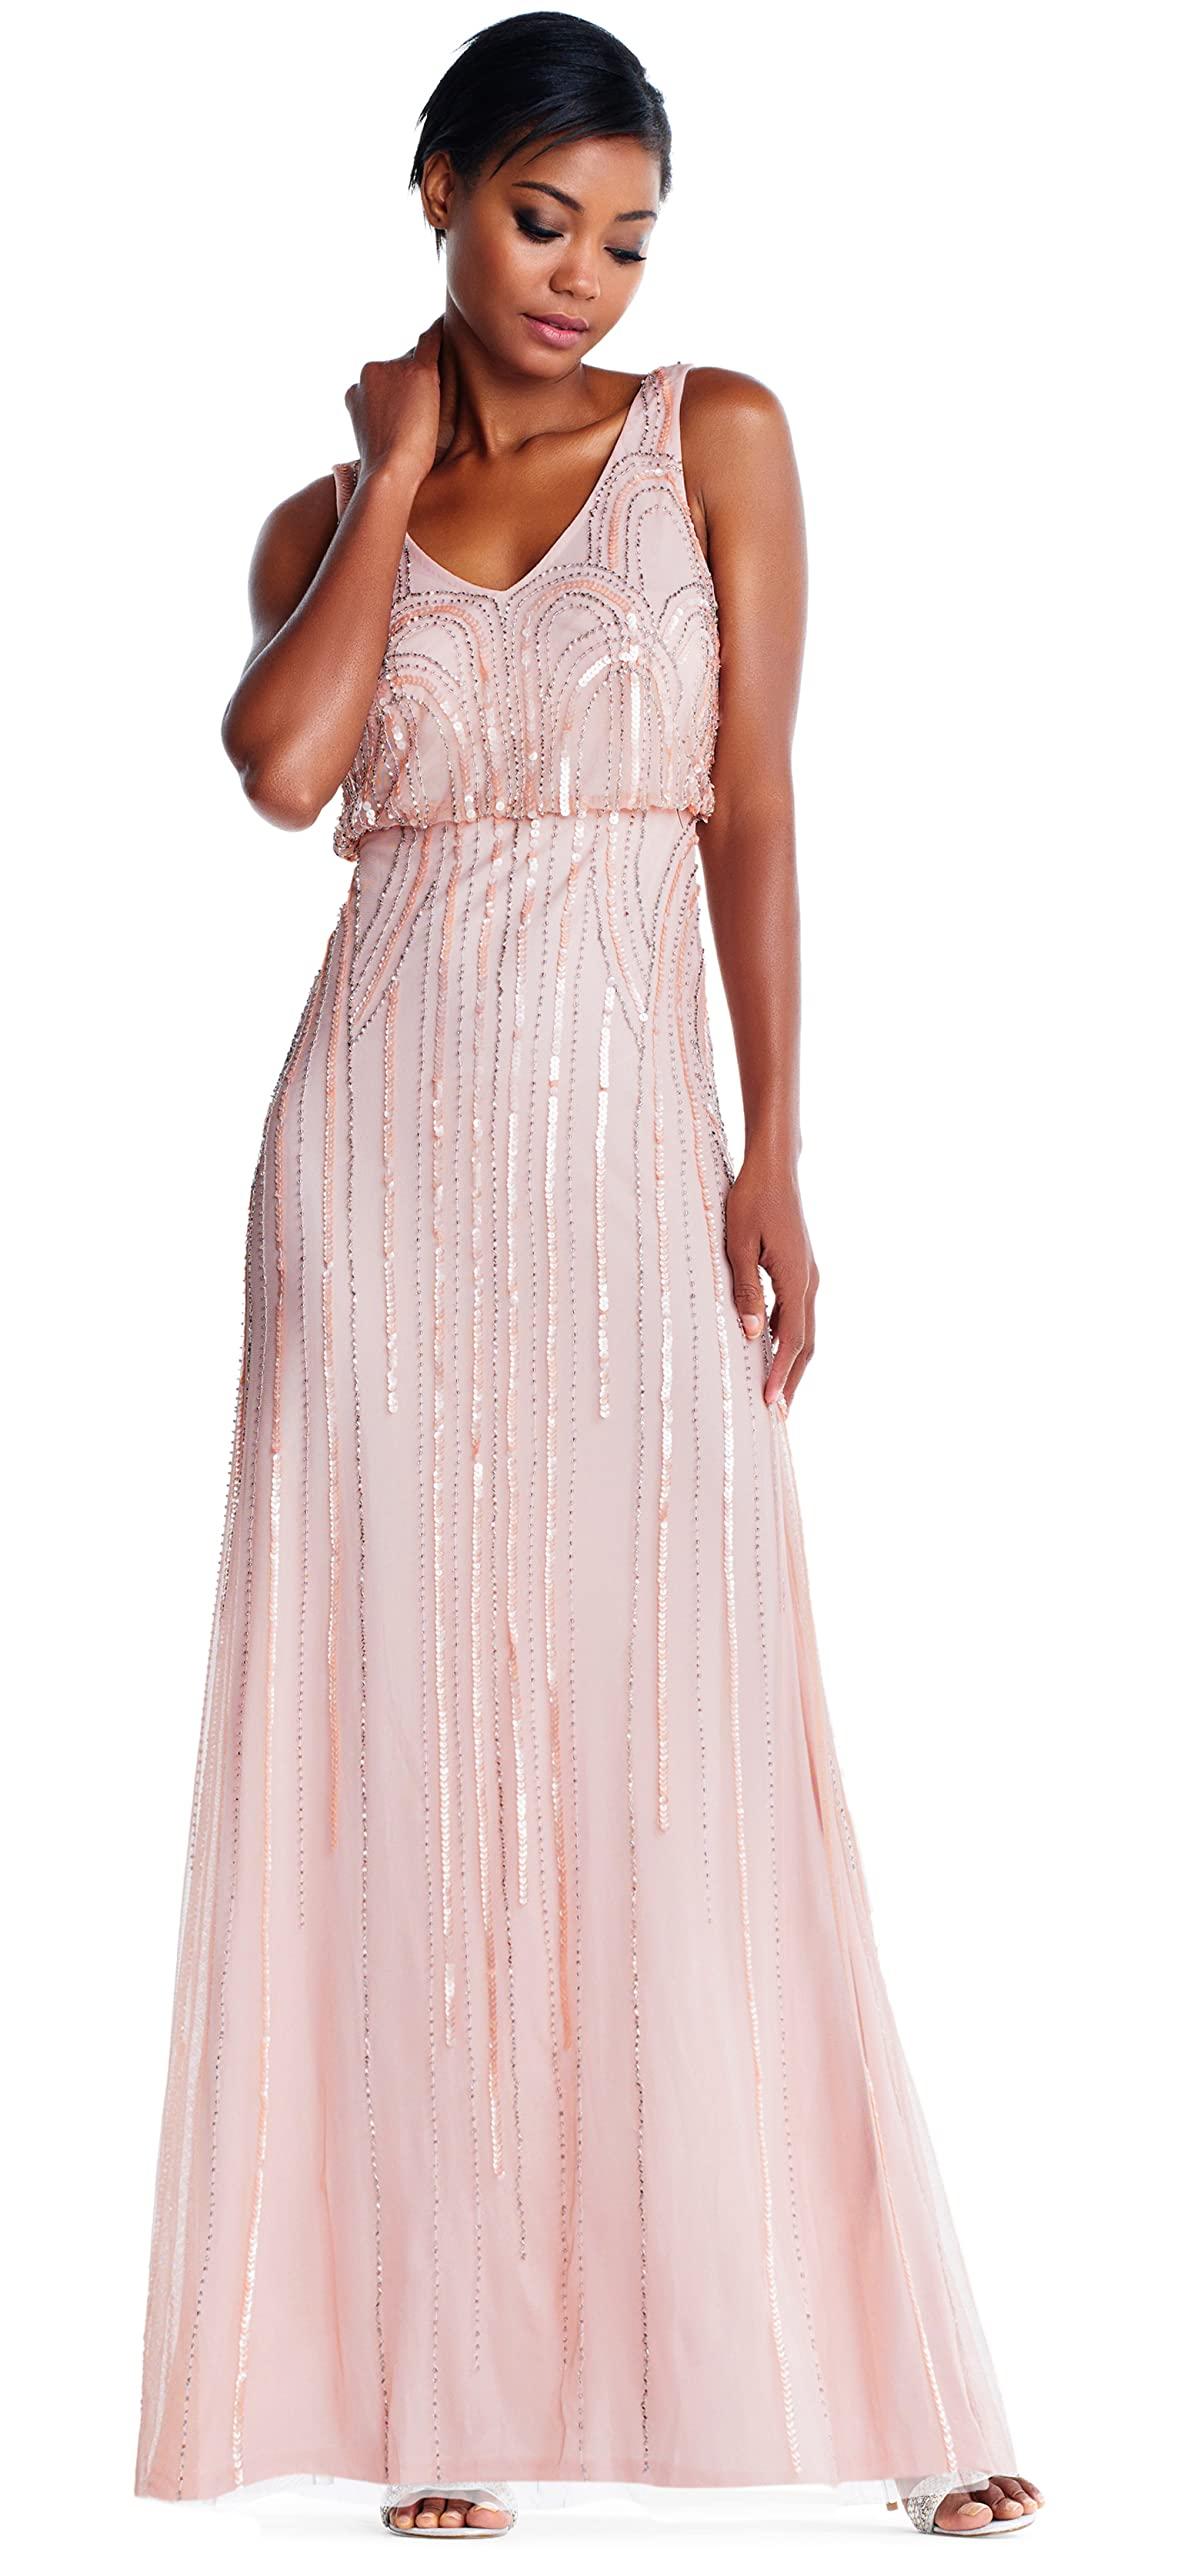 NWT Adrianna Papell Embellished Blouson Gown Blush Pink 0 4 8 12 14 16 #N141 